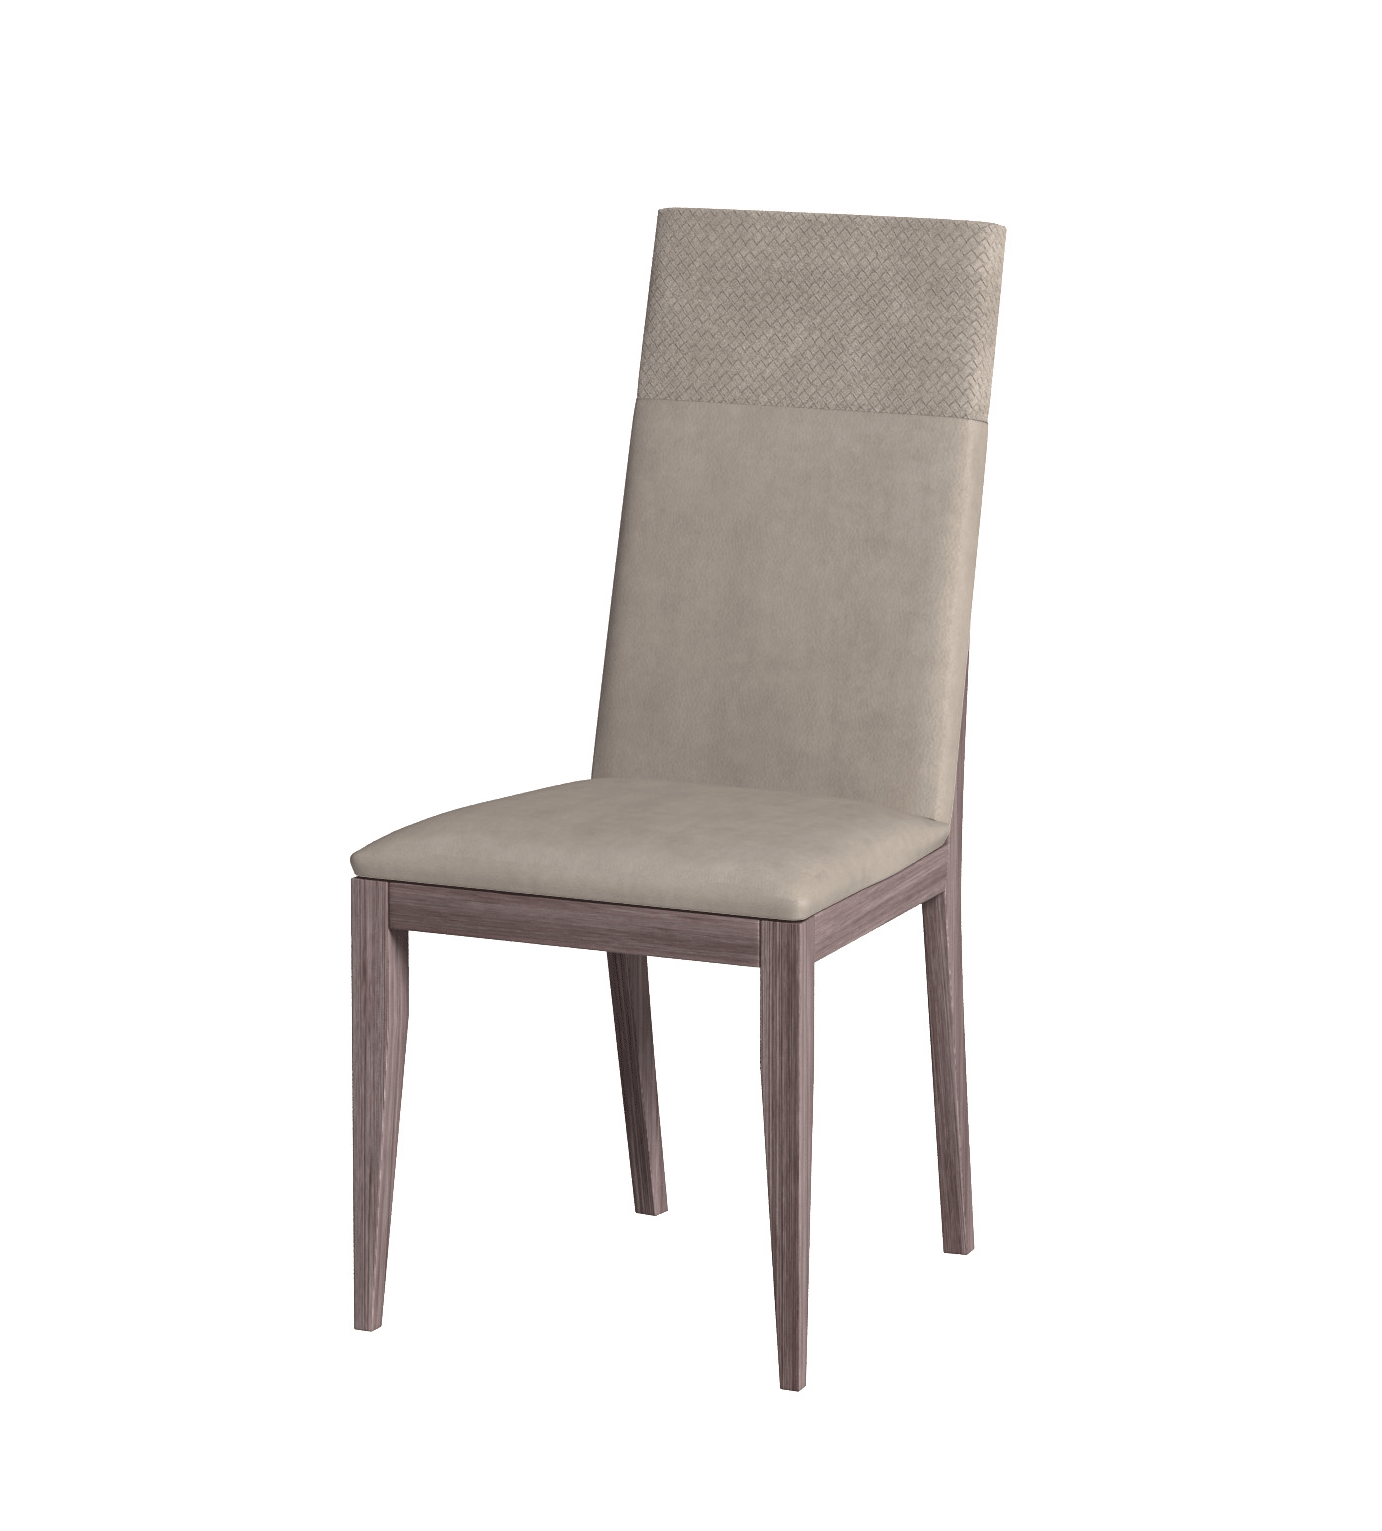 Brands Status Modern Collections, Italy Viola Chair